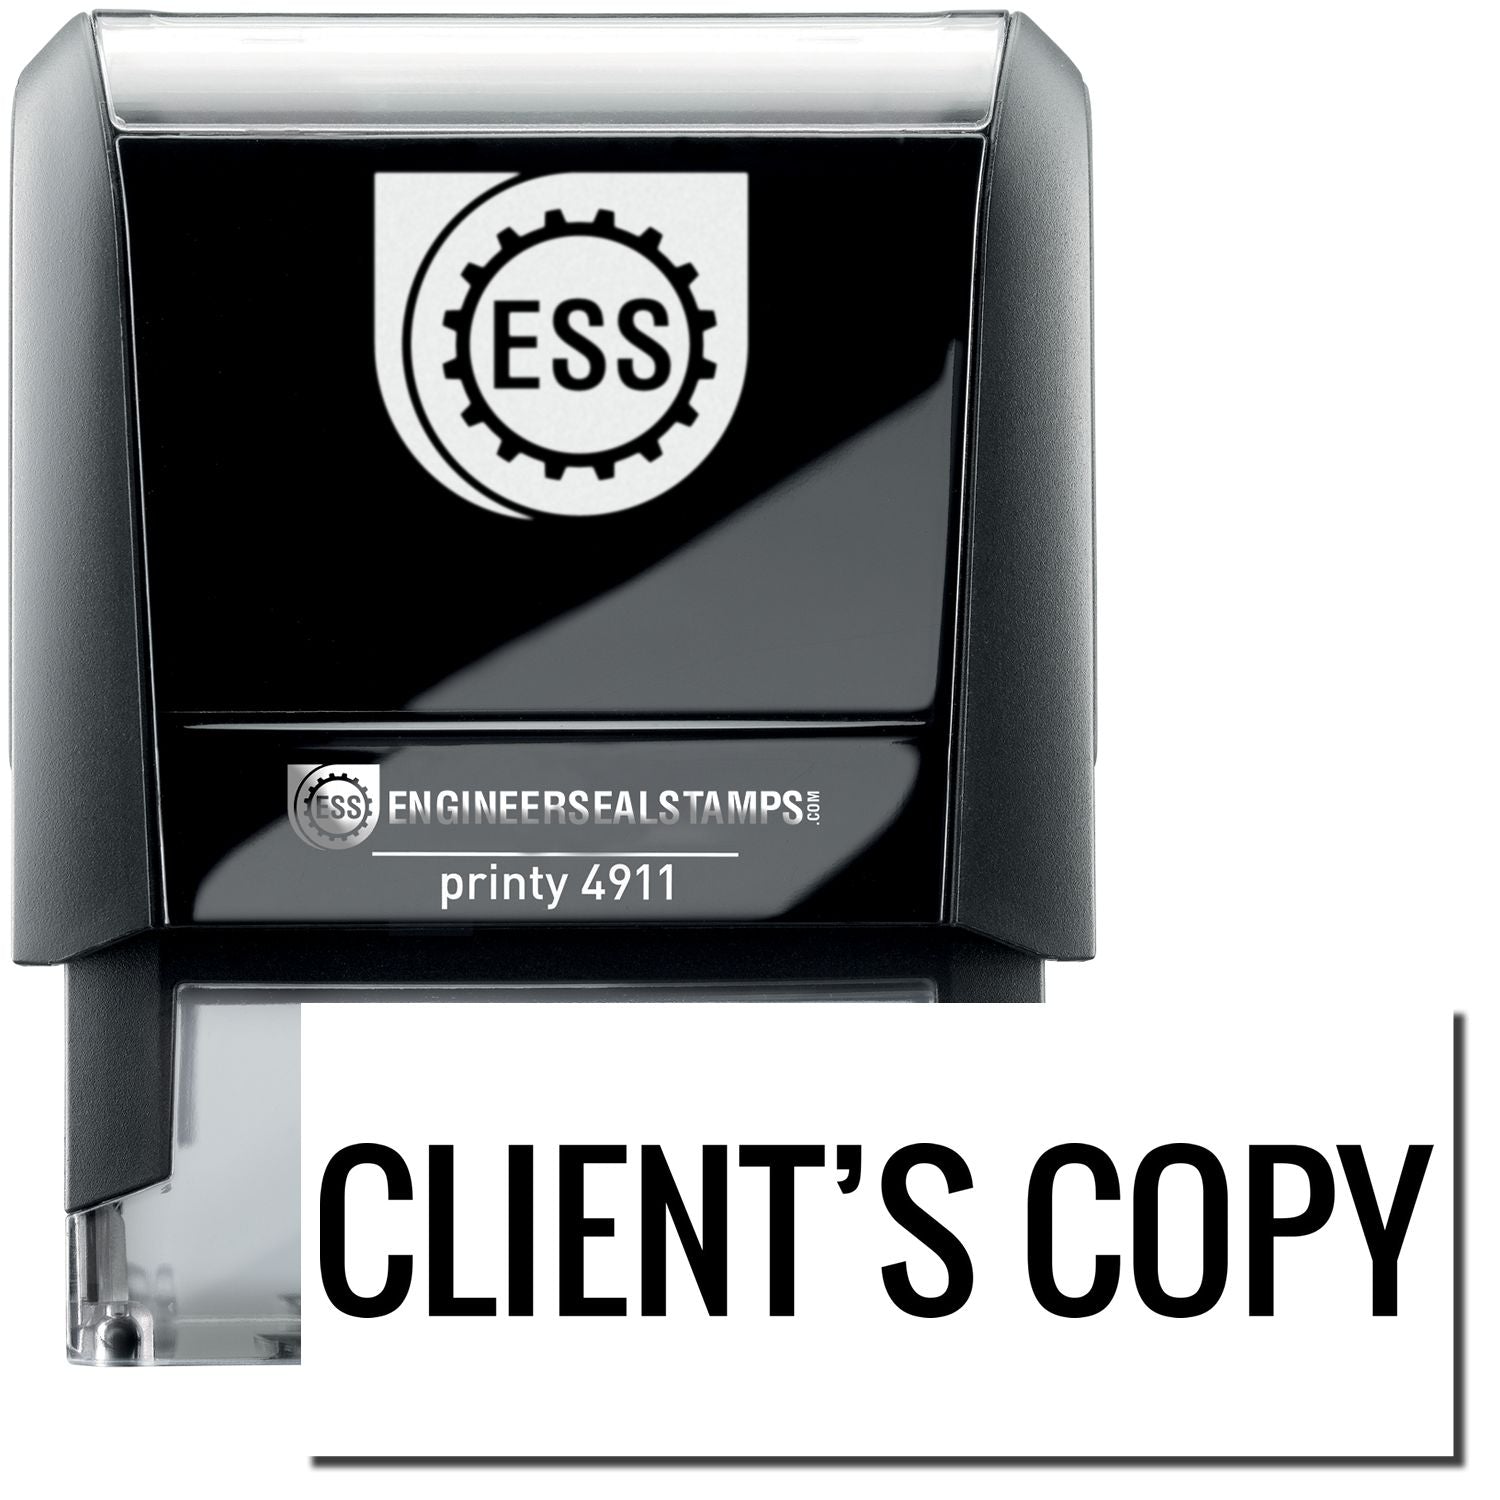 A self-inking stamp with a stamped image showing how the text "CLIENT'S COPY" is displayed after stamping.